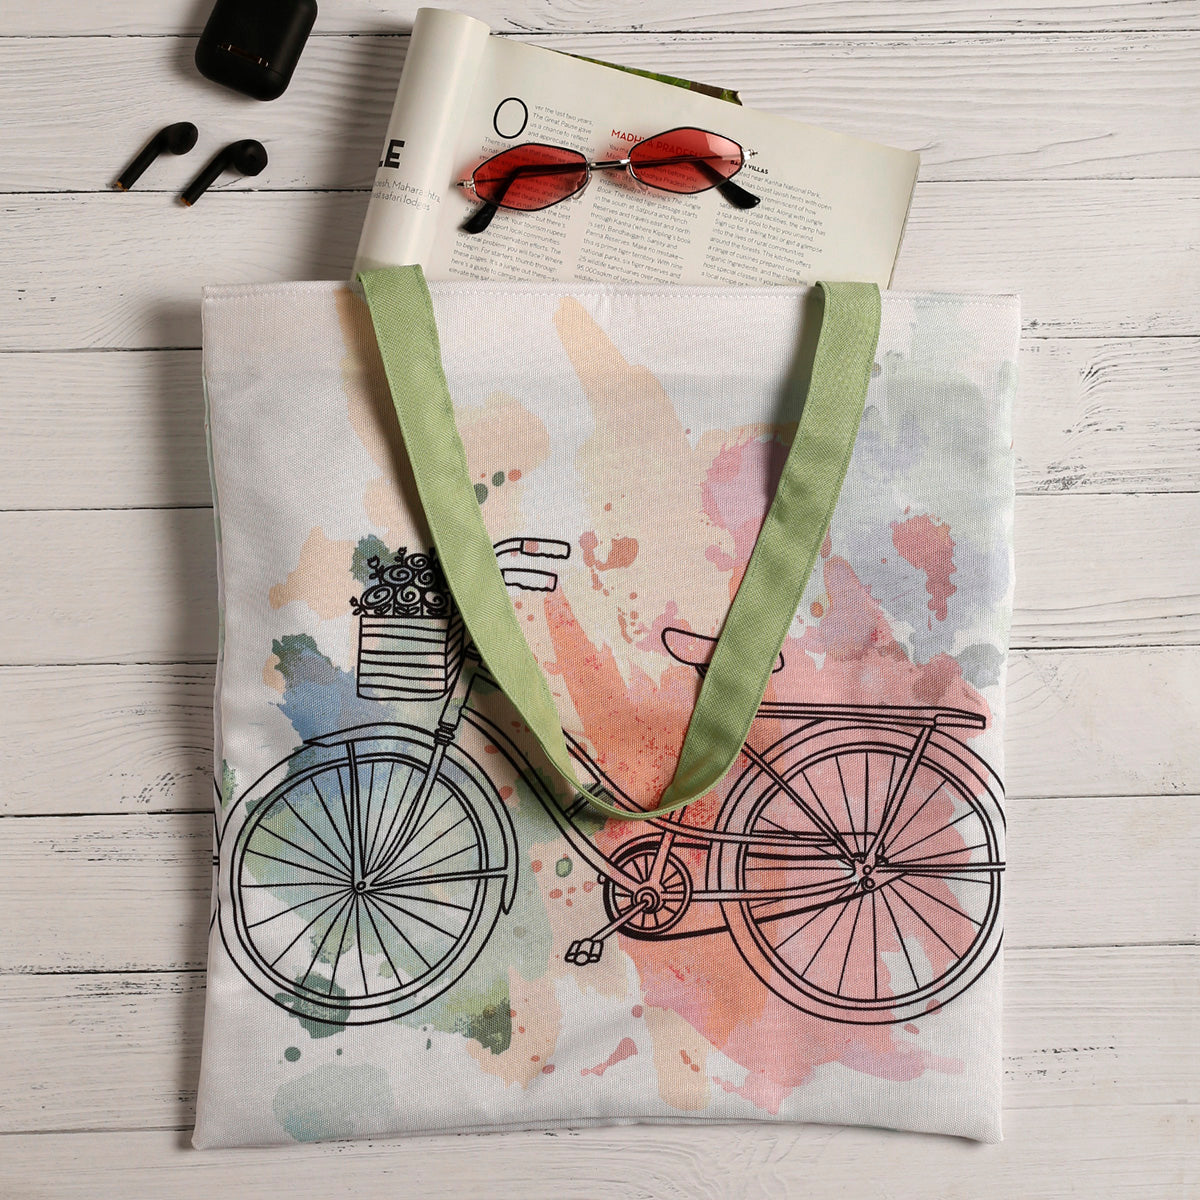 A stylish tote bag featuring a colorful bicycle design, perfect for carrying your essentials on the go.